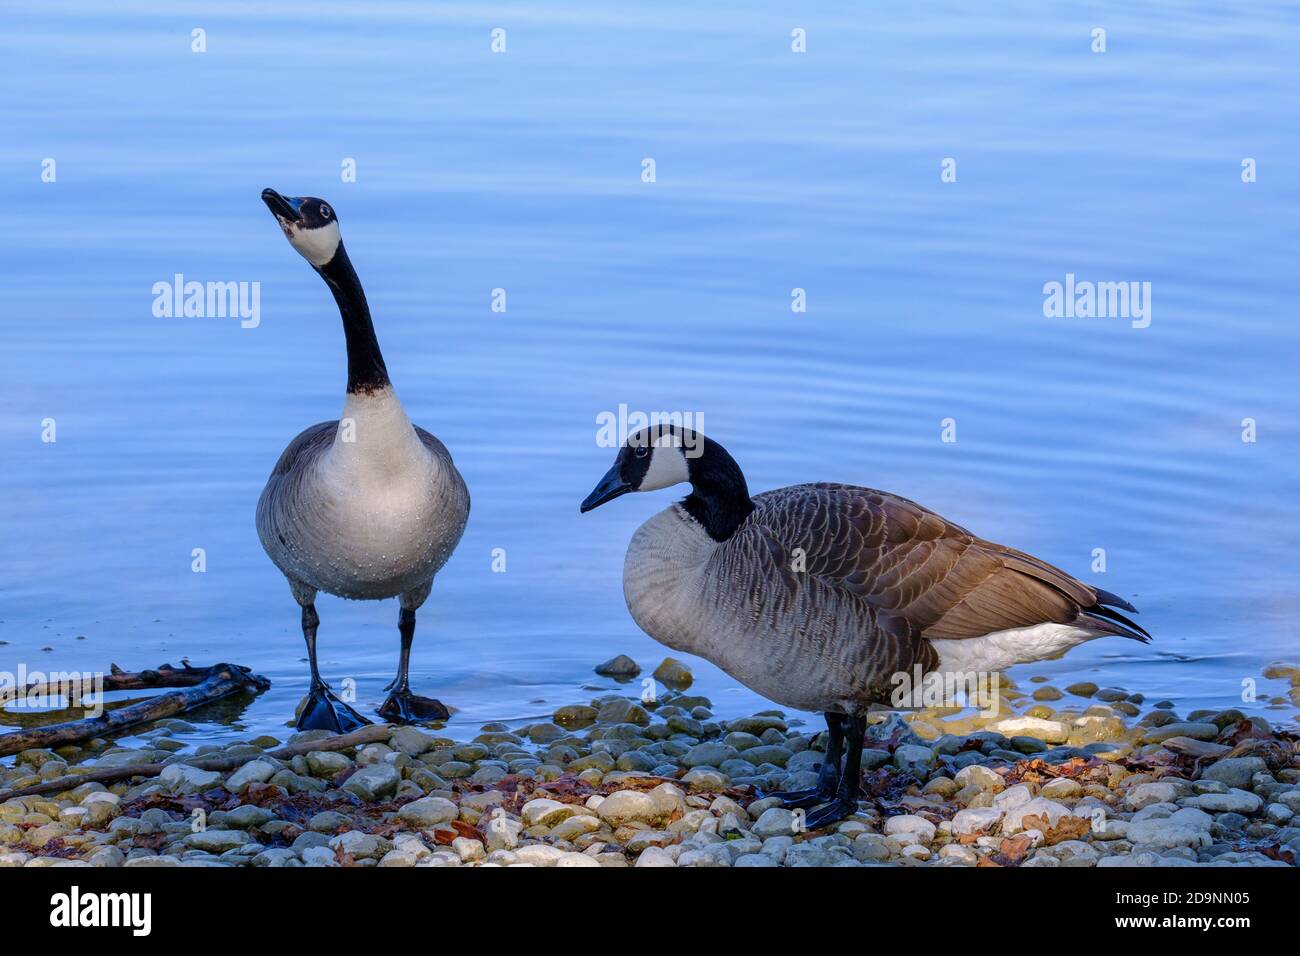 two Canada geese (Branta canadensis) on gravel on the lakeshore, Ammersee near Aidenried, Fünfseenland, Upper Bavaria, Bavaria, Germany Stock Photo